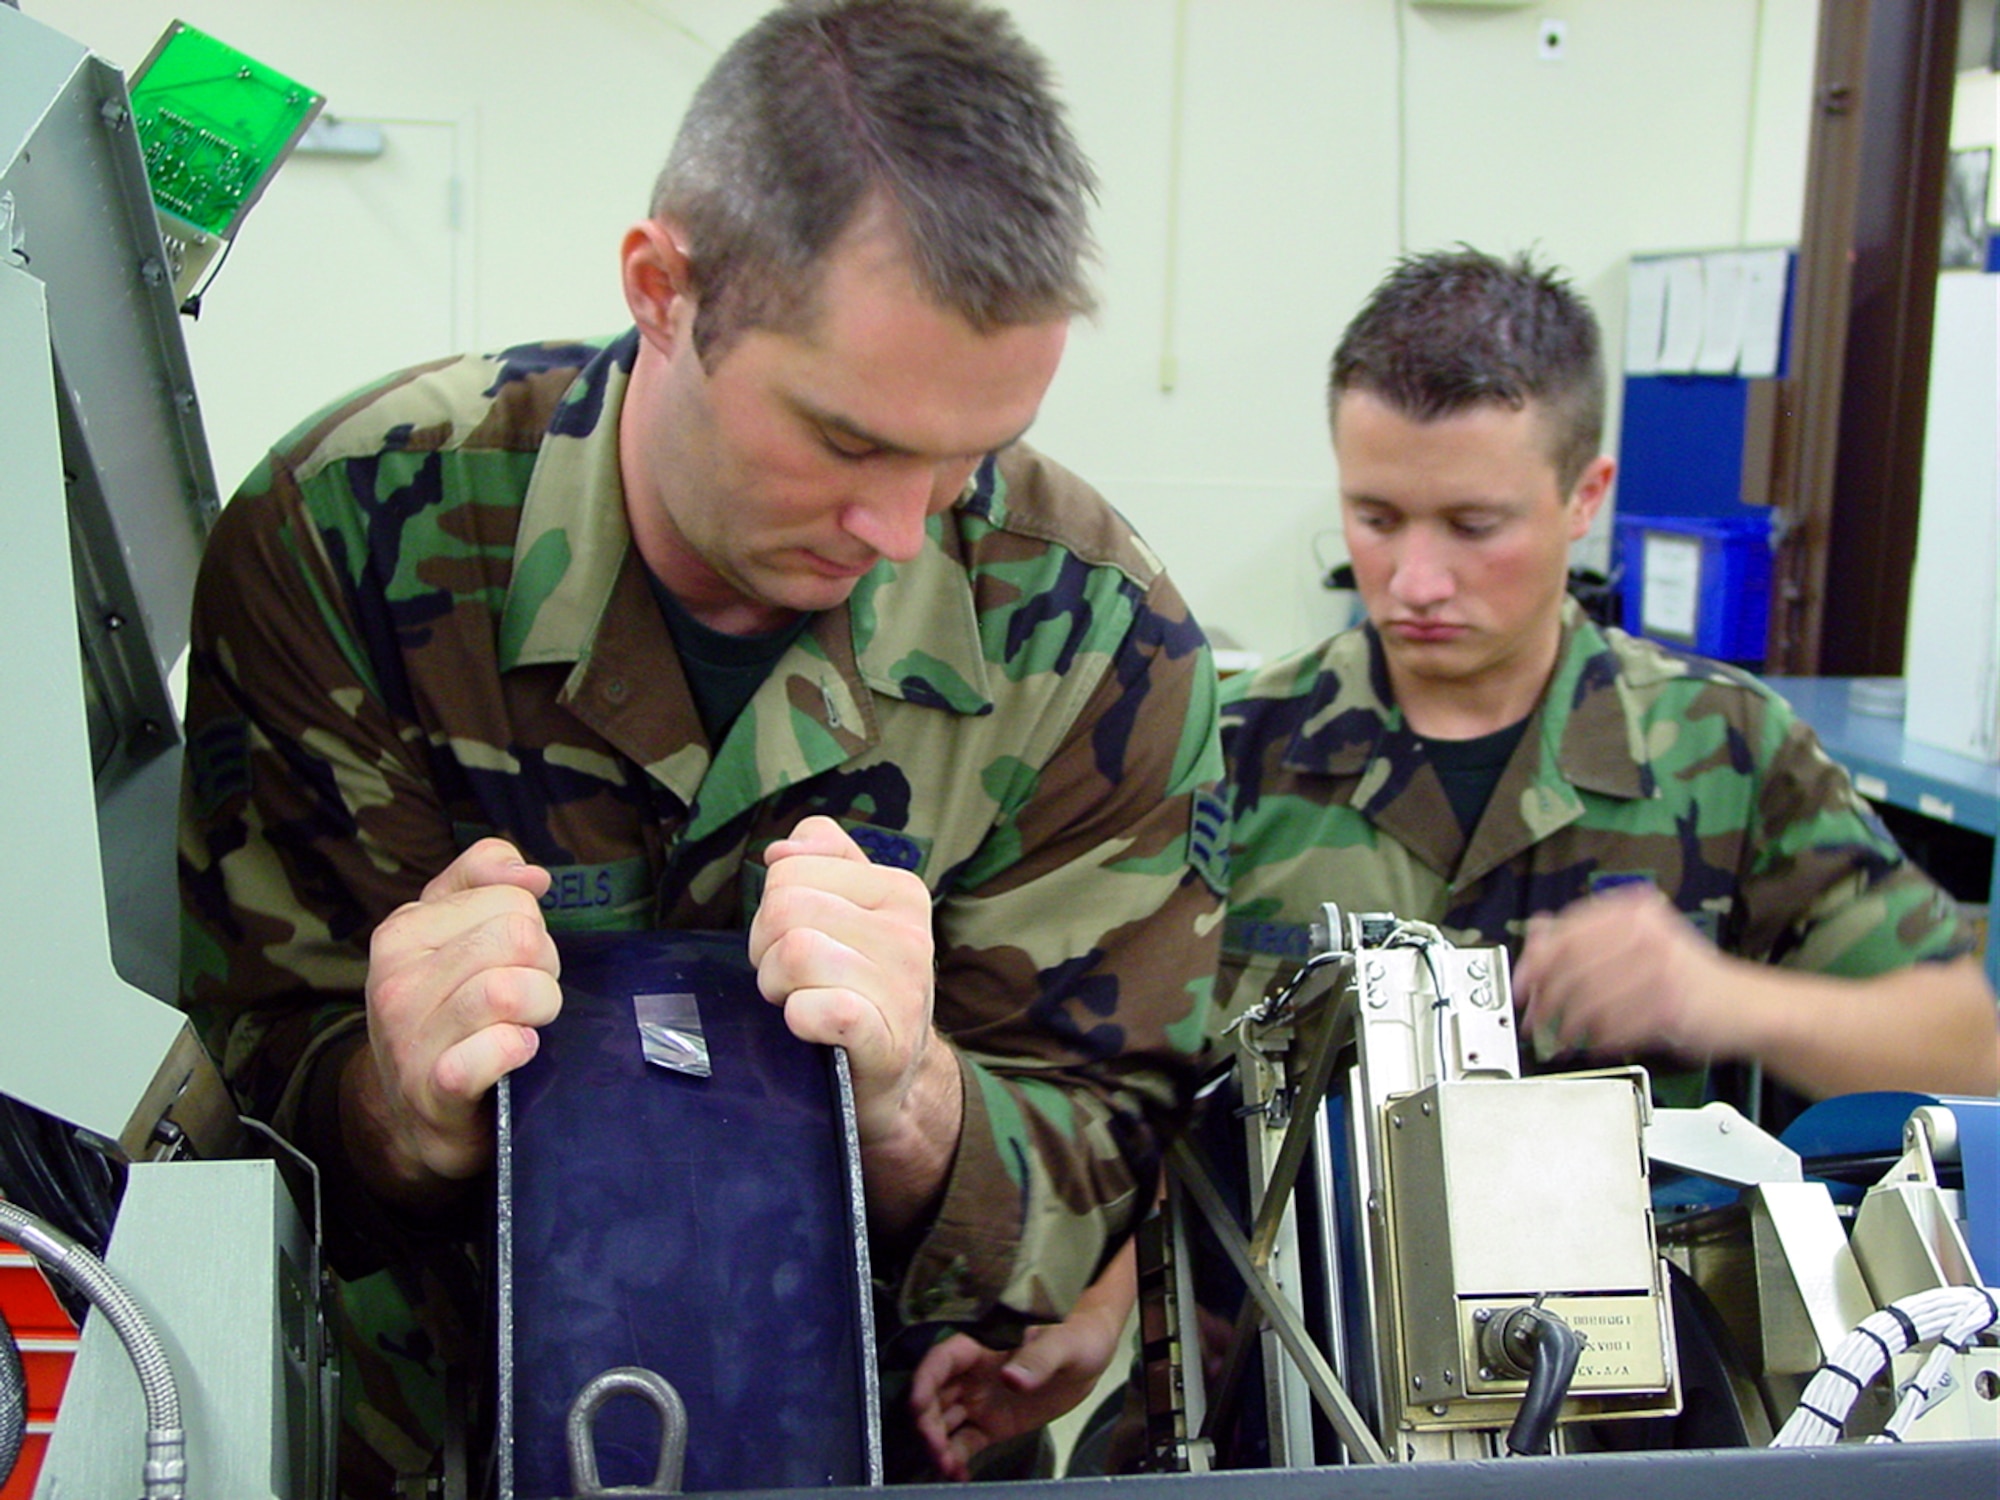 BEALE AIR FORCE BASE, Calif. (AFPN) -- Senior Airman Martin Vessels (left) loads a 100-pound roll of film into a U-2 optical bar camera.  Airman 1st Class Derek Kirkwood (right) delivered the film.  Both are 9th Maintenance Squadron avionics sensor technicians assigned here.  (U.S. Air Force photo by Master Sgt. Tim Helton)